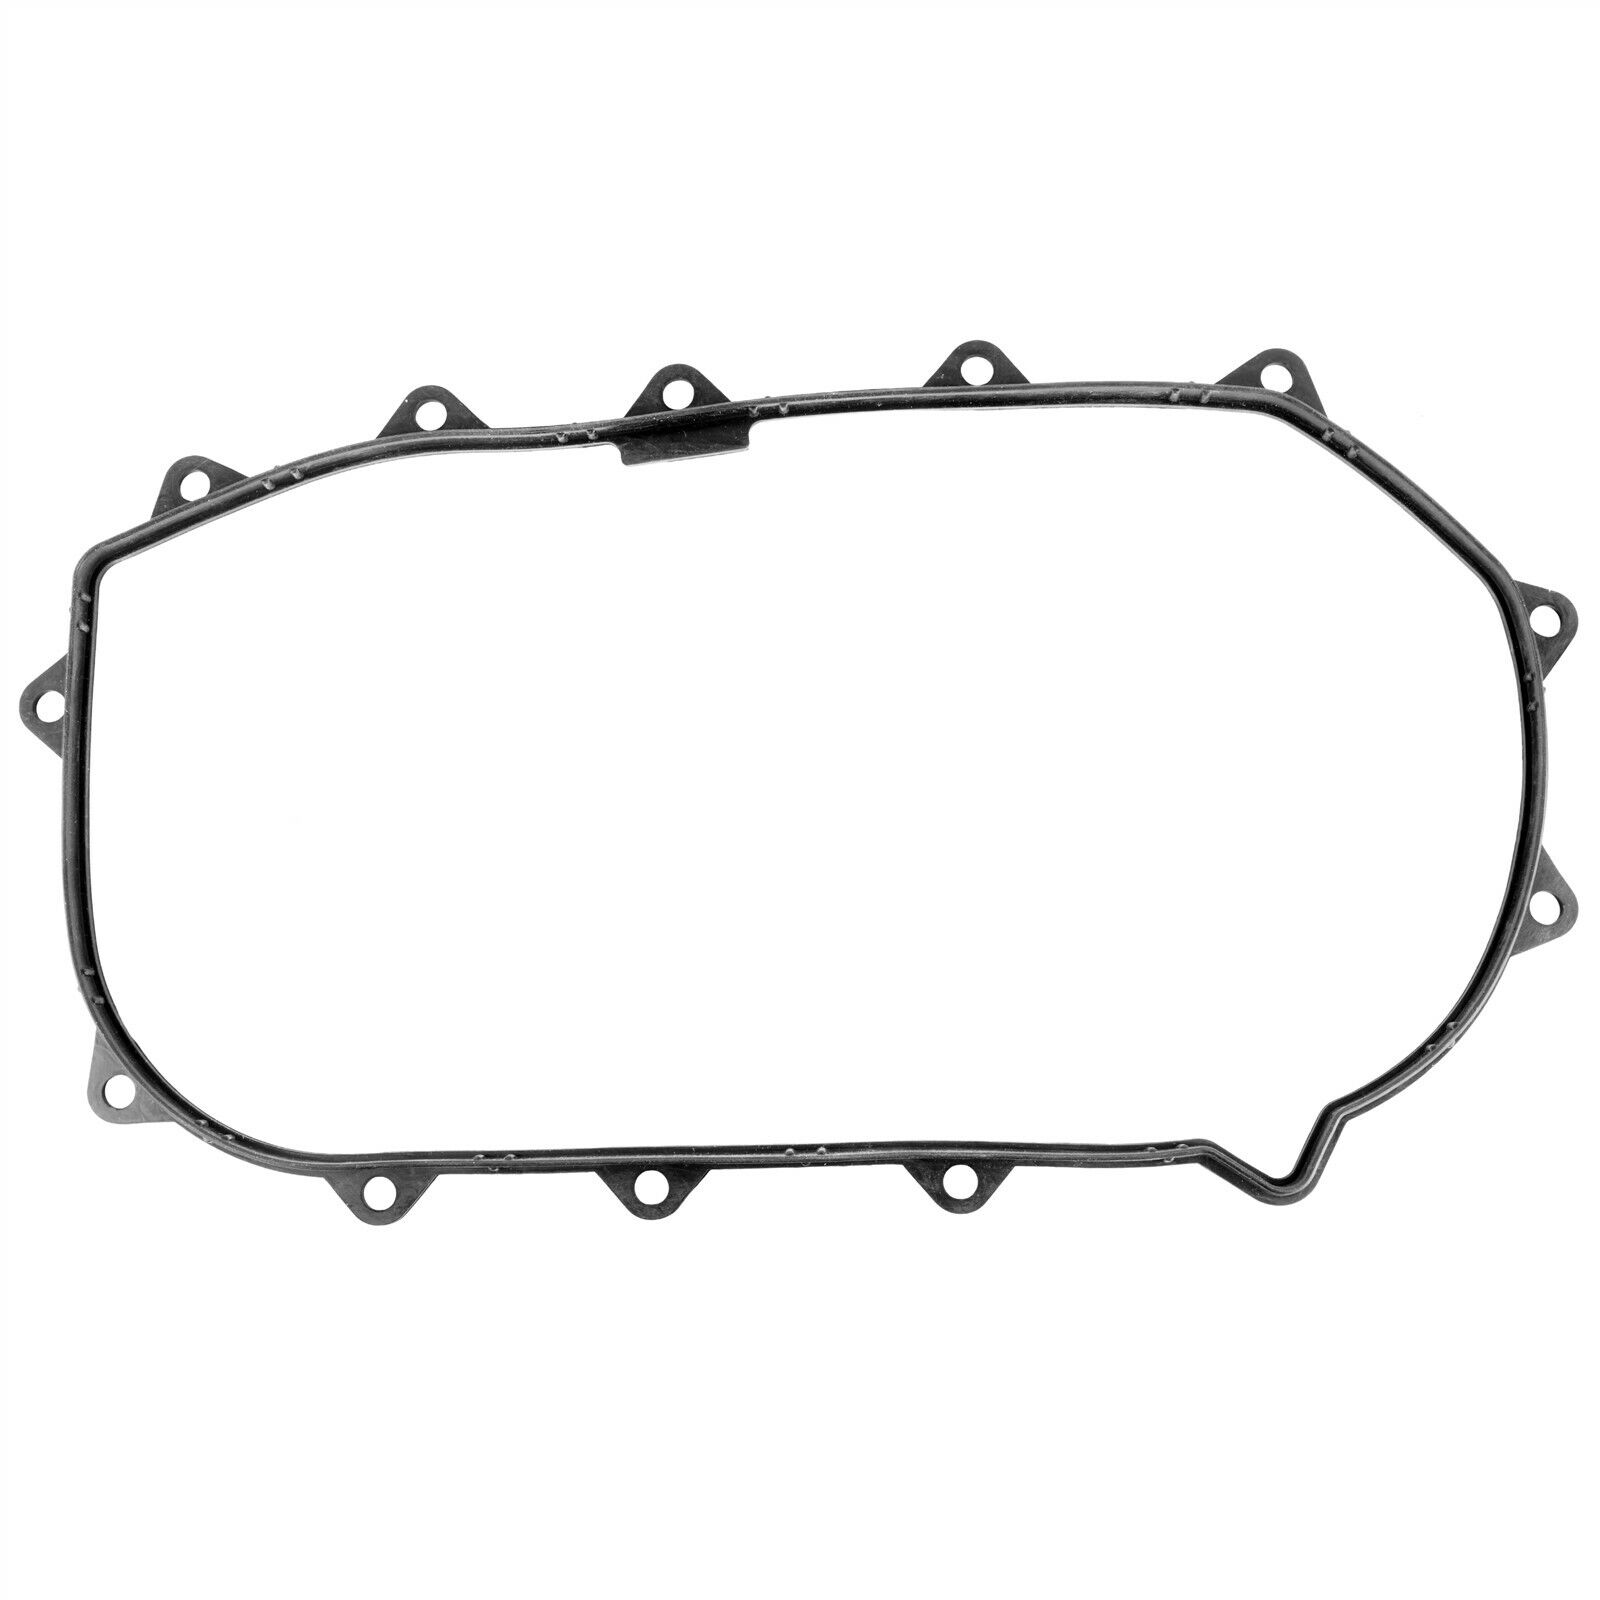 CVT Clutch Cover Gasket Fits Can-Am Outlander 800 800R/ MAX 800R 4X4 2006 - 2015 - image 3 of 3